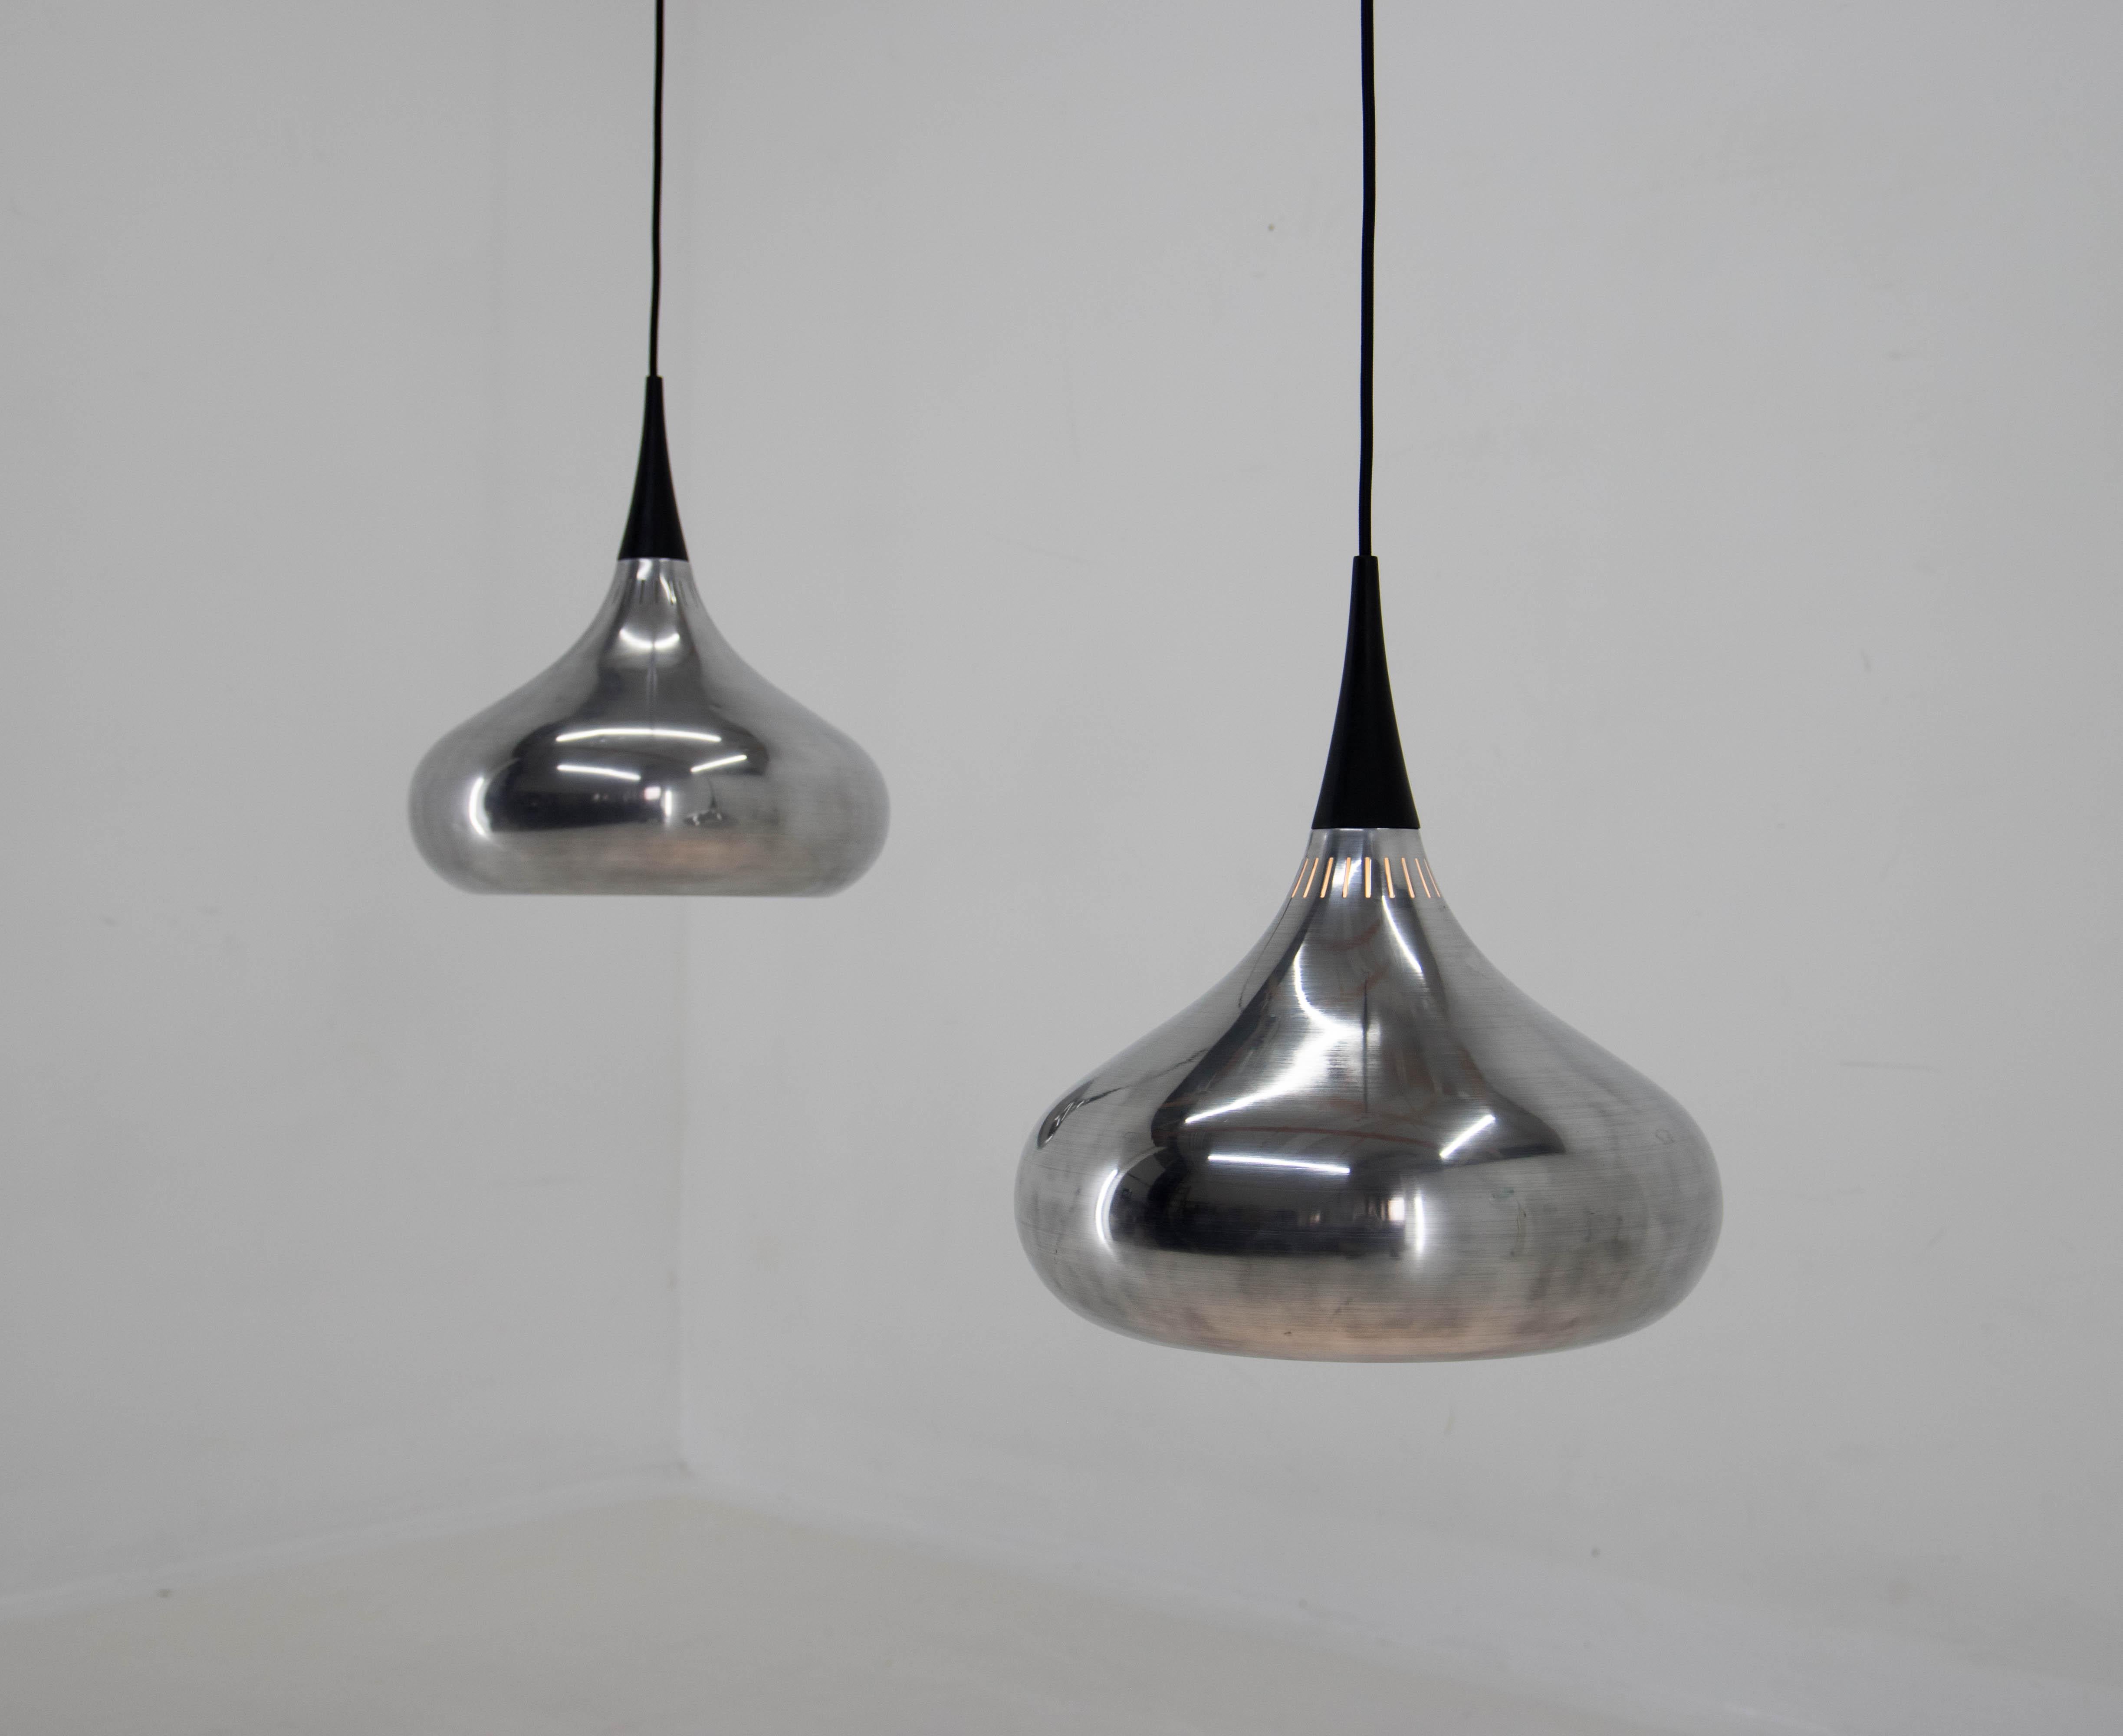 The orient pendant was designed by Jo Hammerborg in the 1960s. 
Aluminum was polished. New white paint inside.
Rewired with textil cable. Minor imperfections visible on pictures.
Max height including cable 128cm can be easily shorten.
E25-E27 bulb, 